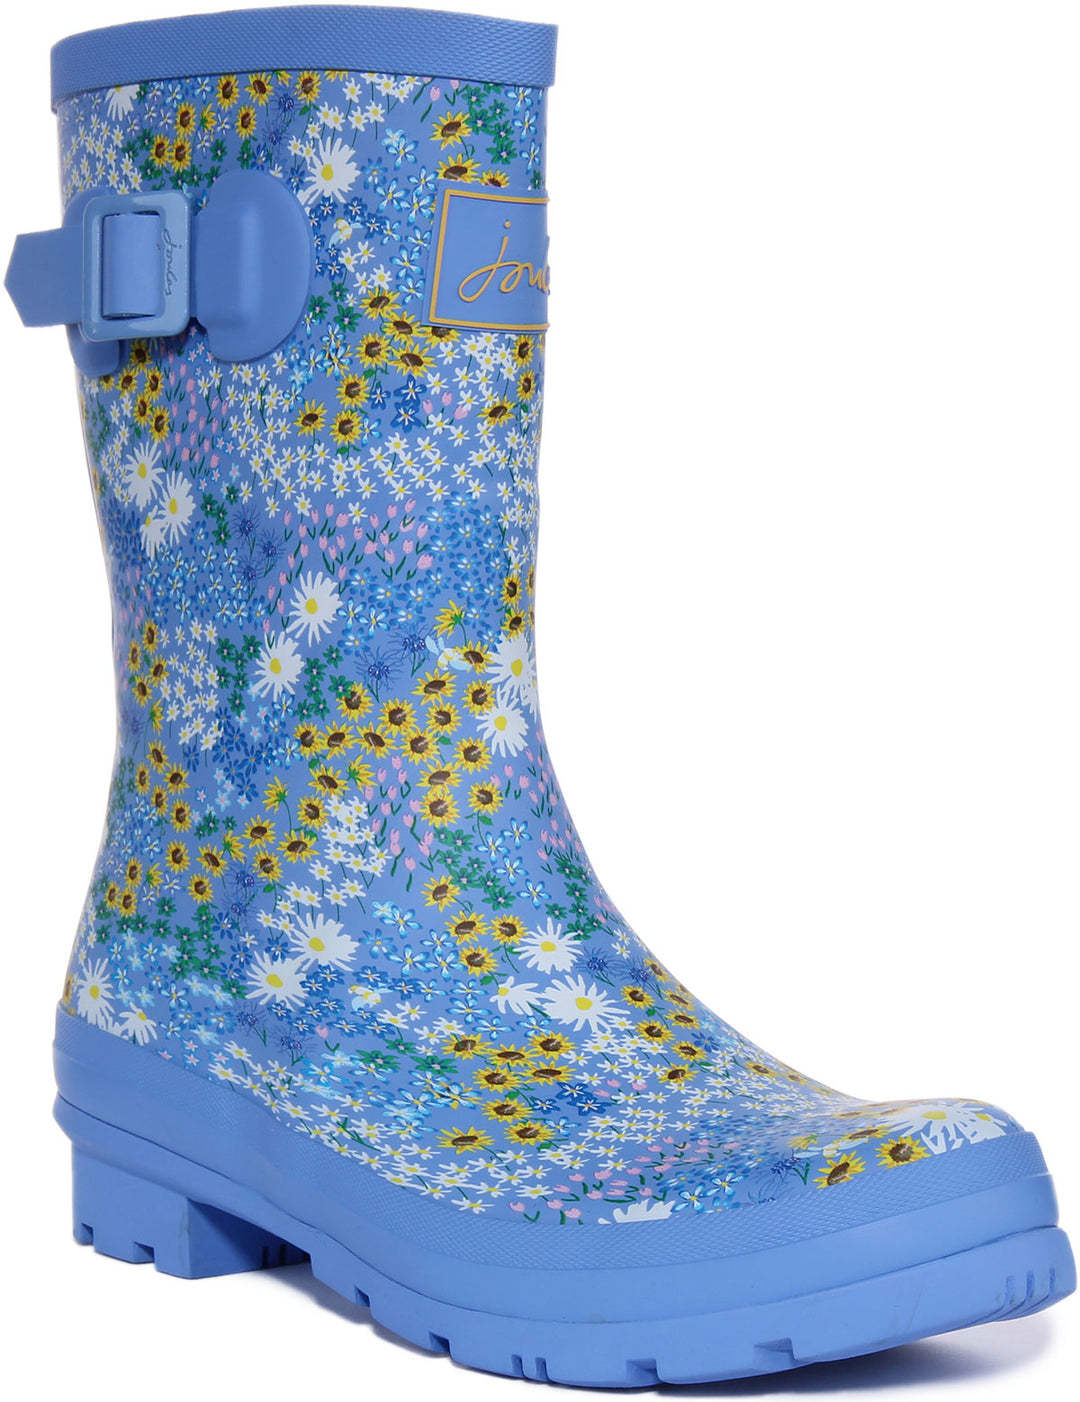 Joules Molly Welly Stivale Wellington con stampa floreale a strisce da donna in blu